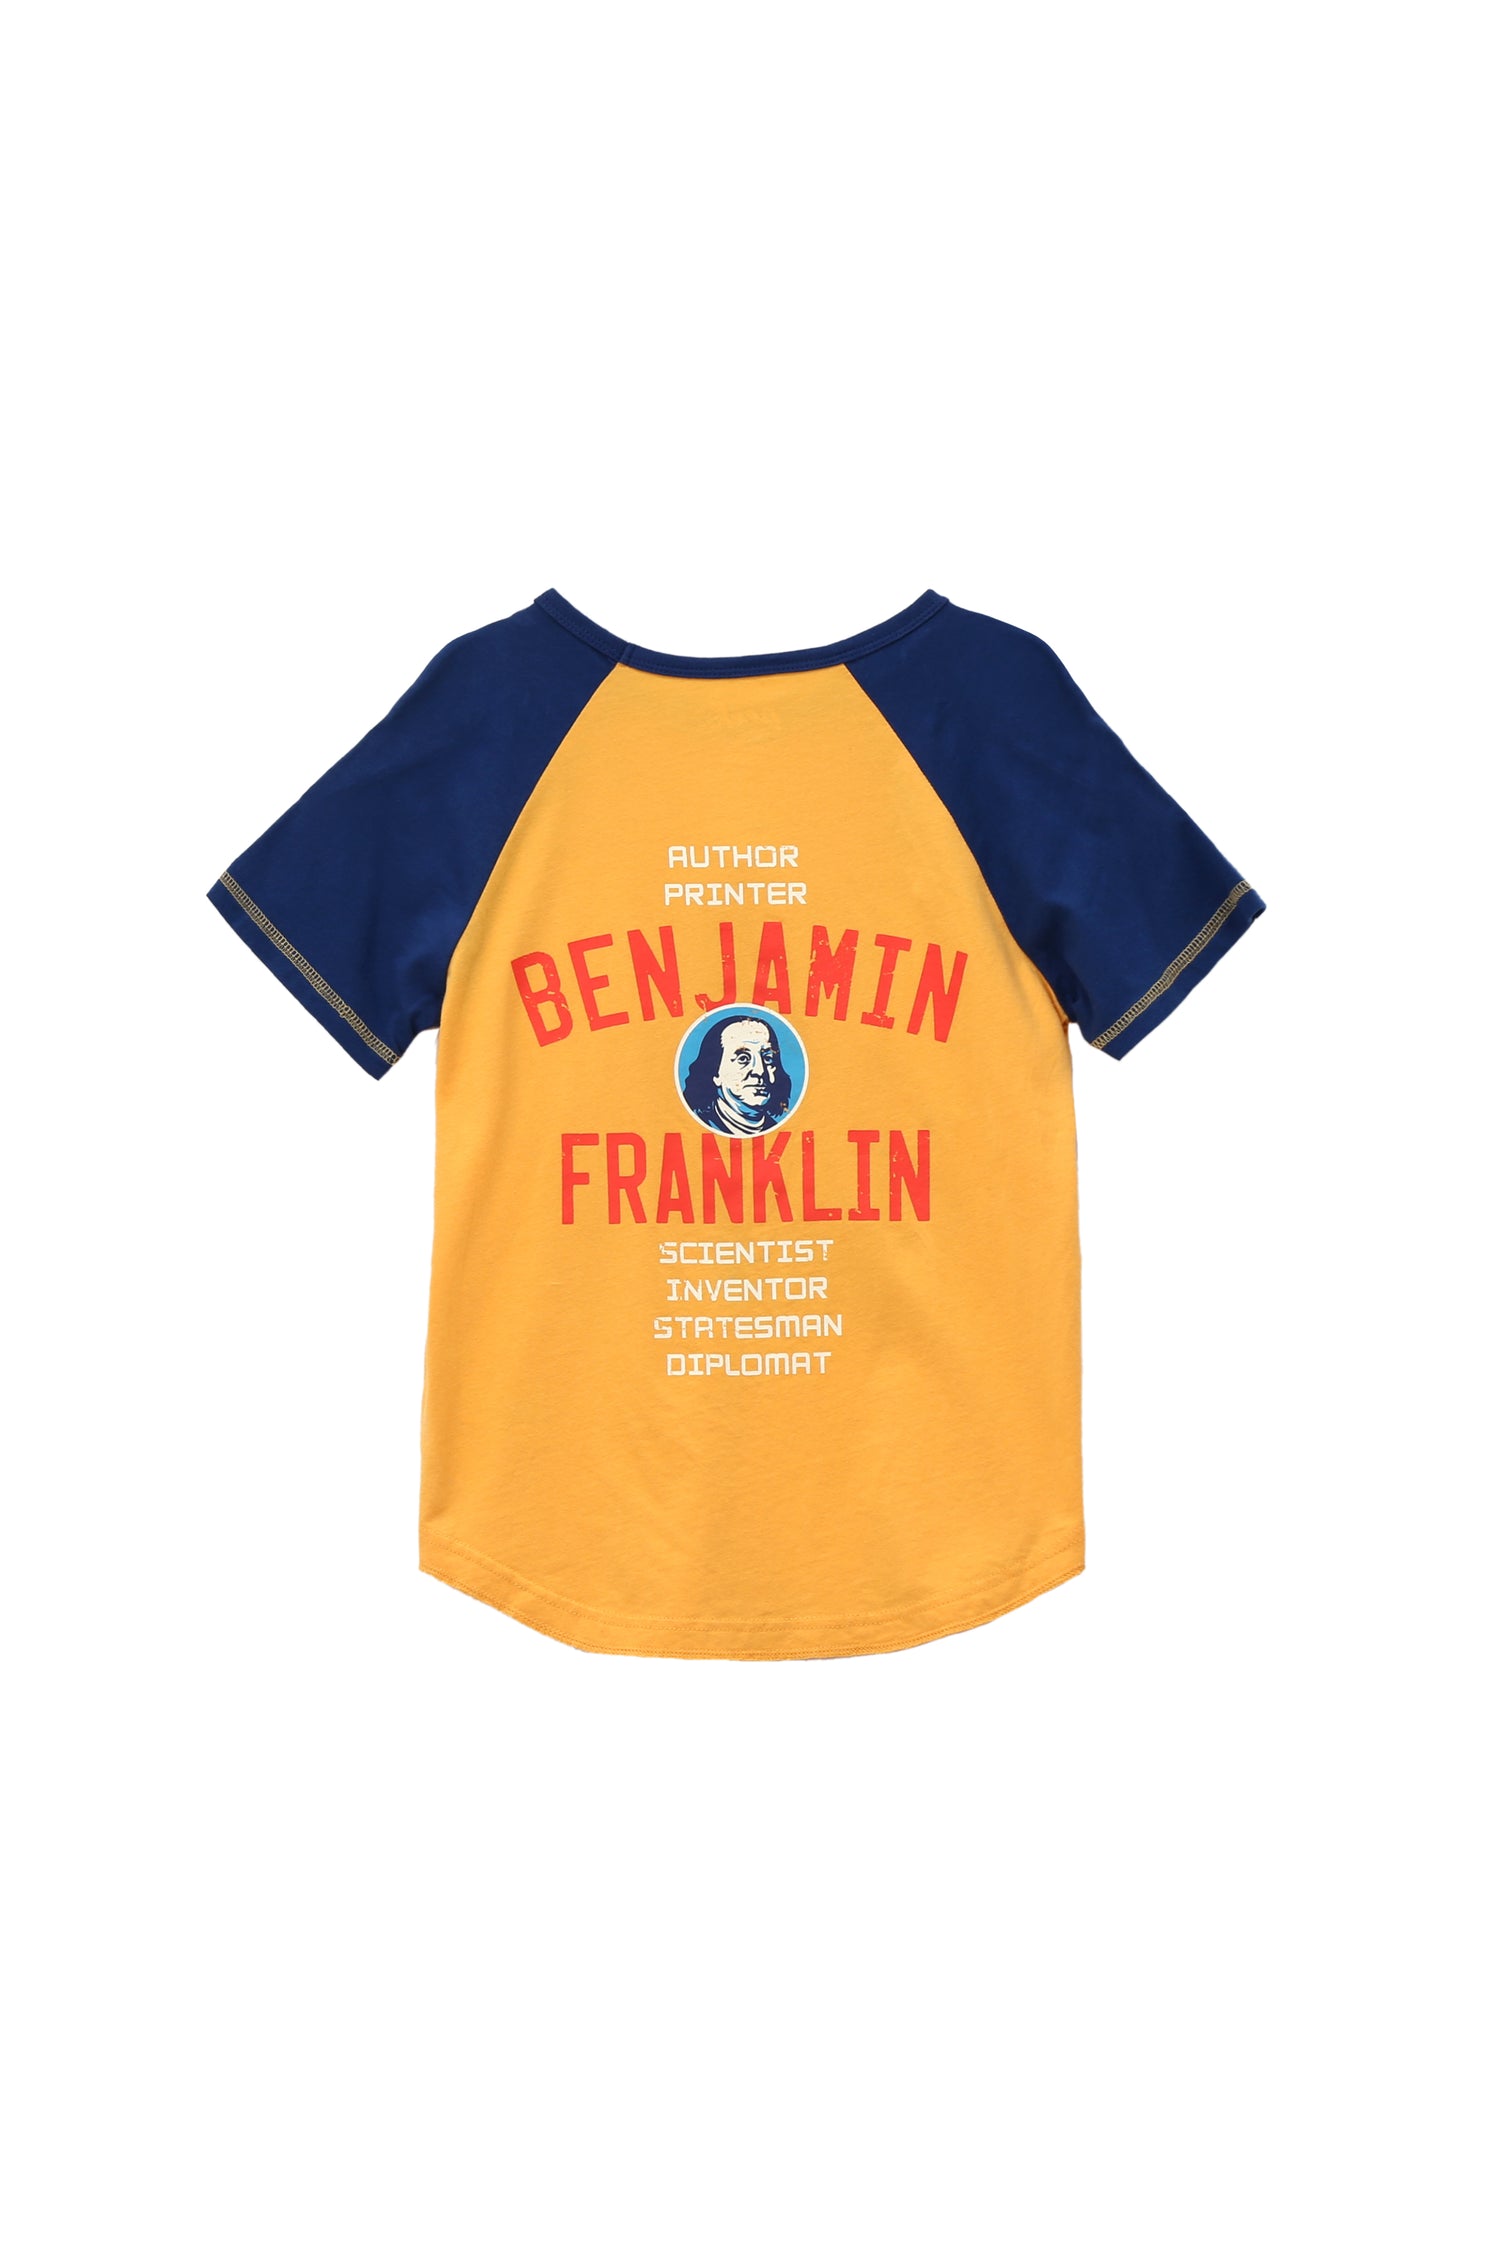 BACK OF YELLOW AND BLUE SHORT-SLEEVE RAGLAN TEE WITH "BENJAMIN FRANKLIN"